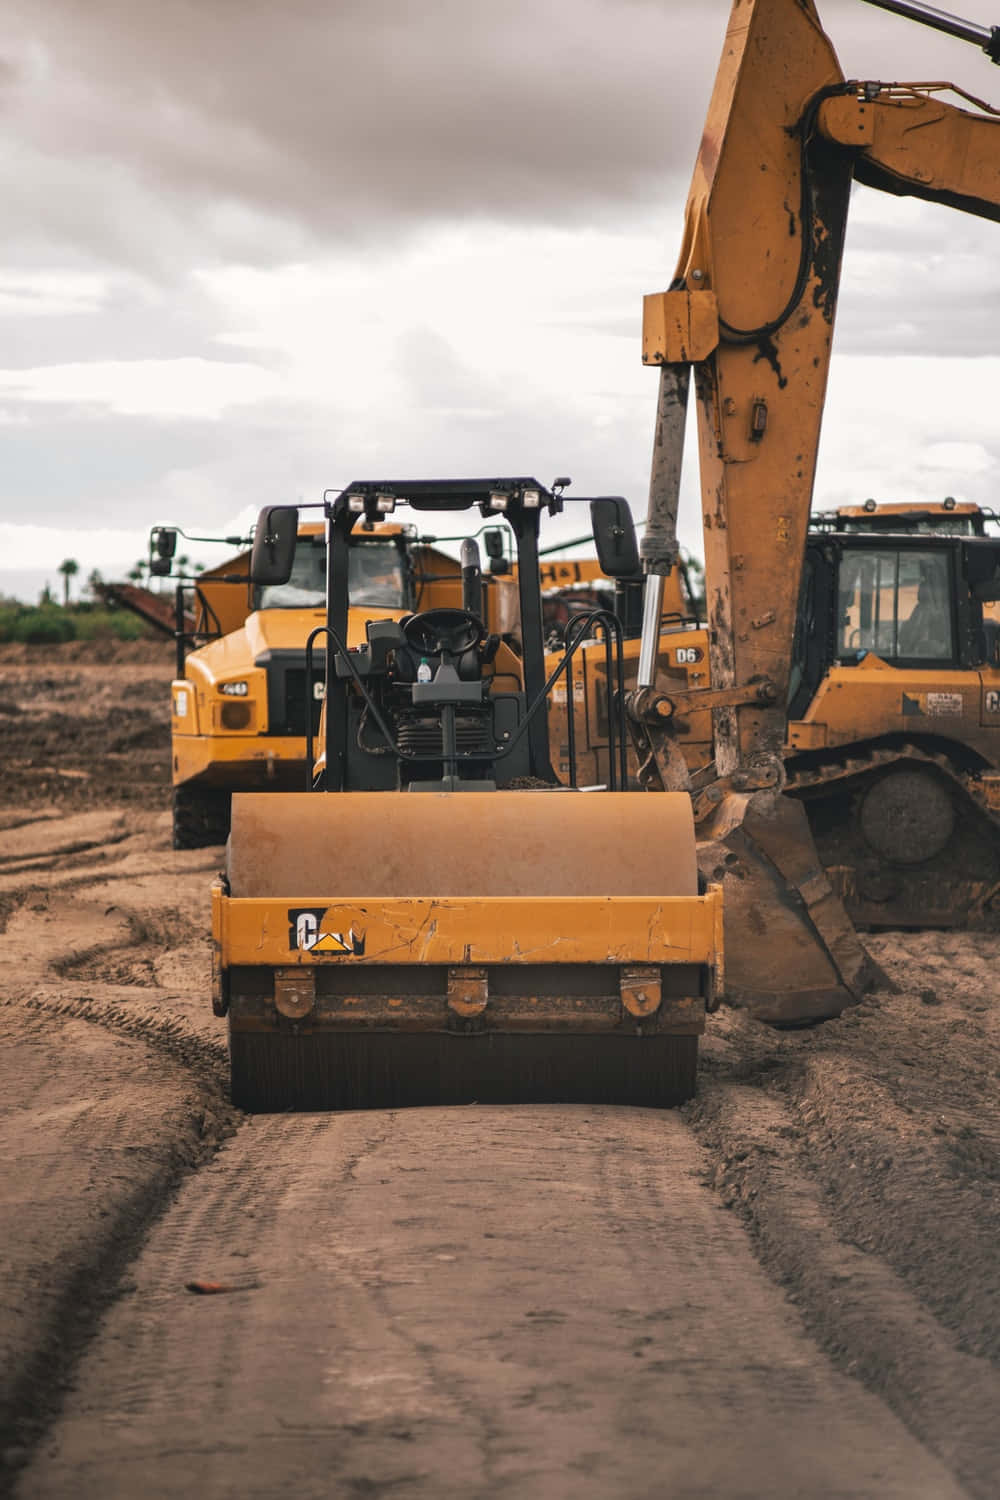 A Bulldozer Is Working On A Dirt Road